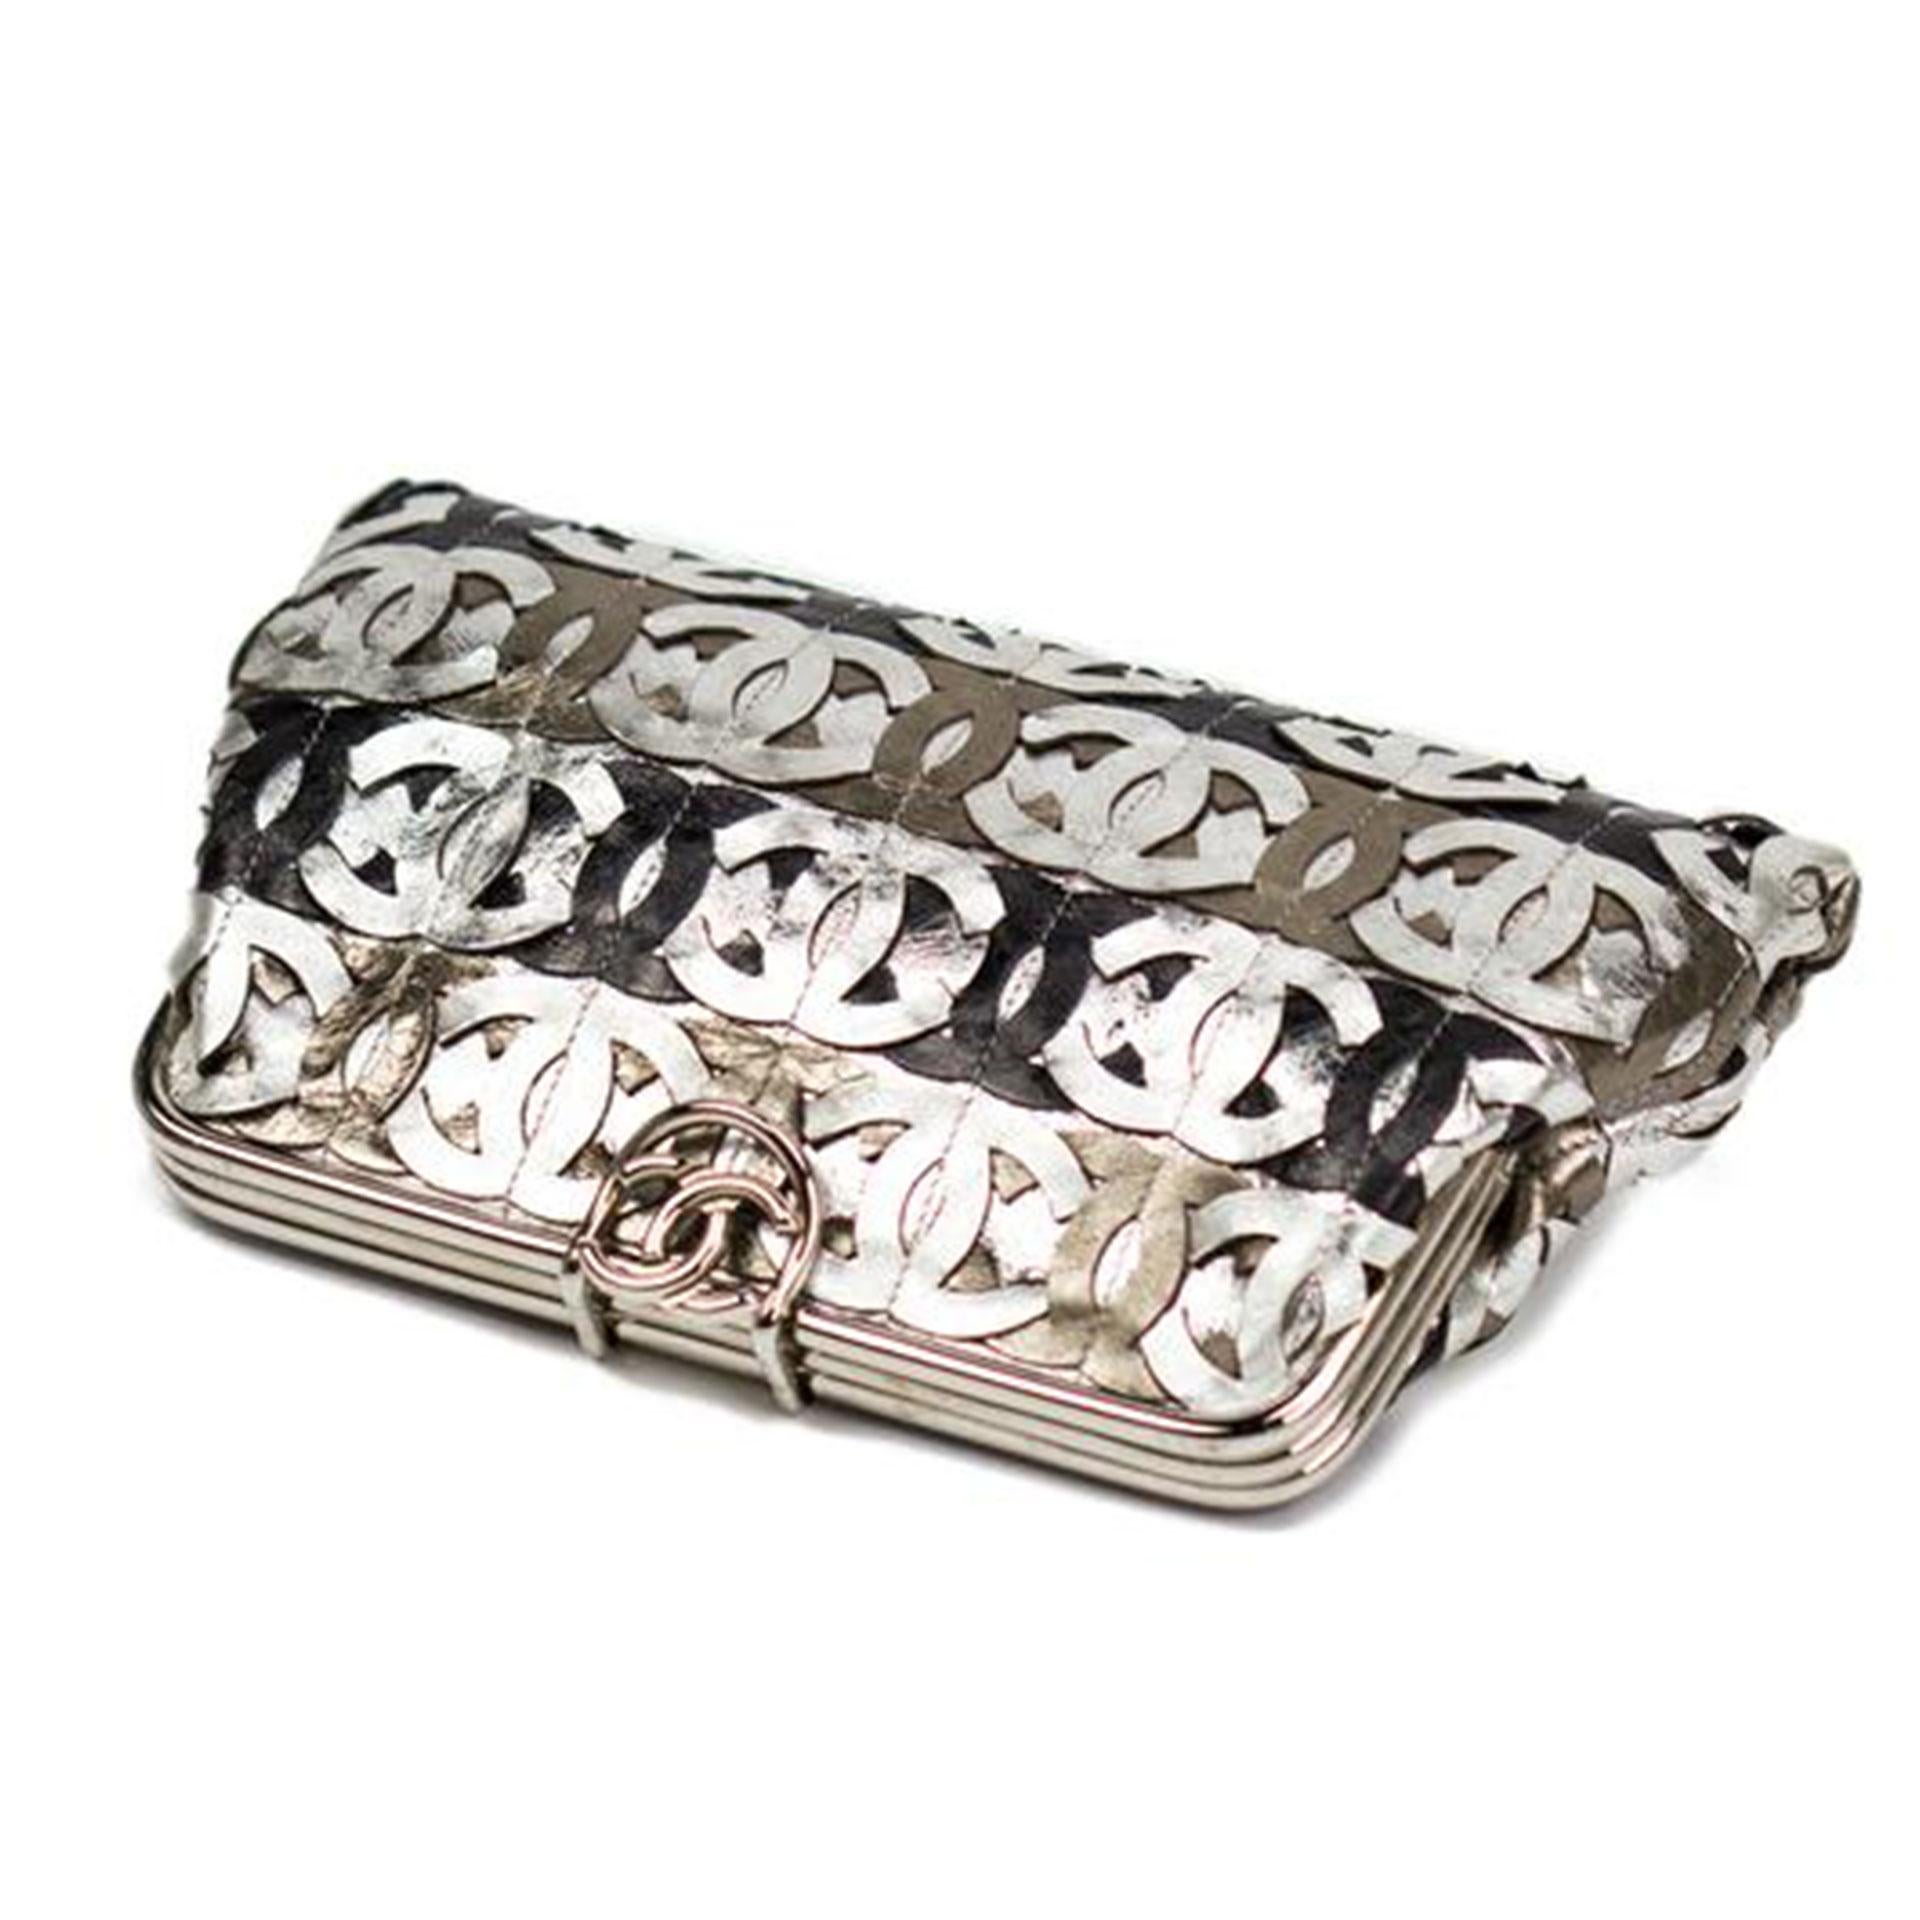 Chanel 2008 Runway Limited Edition Laser CC Metallic Silver Bronze Gold Clutch For Sale 5